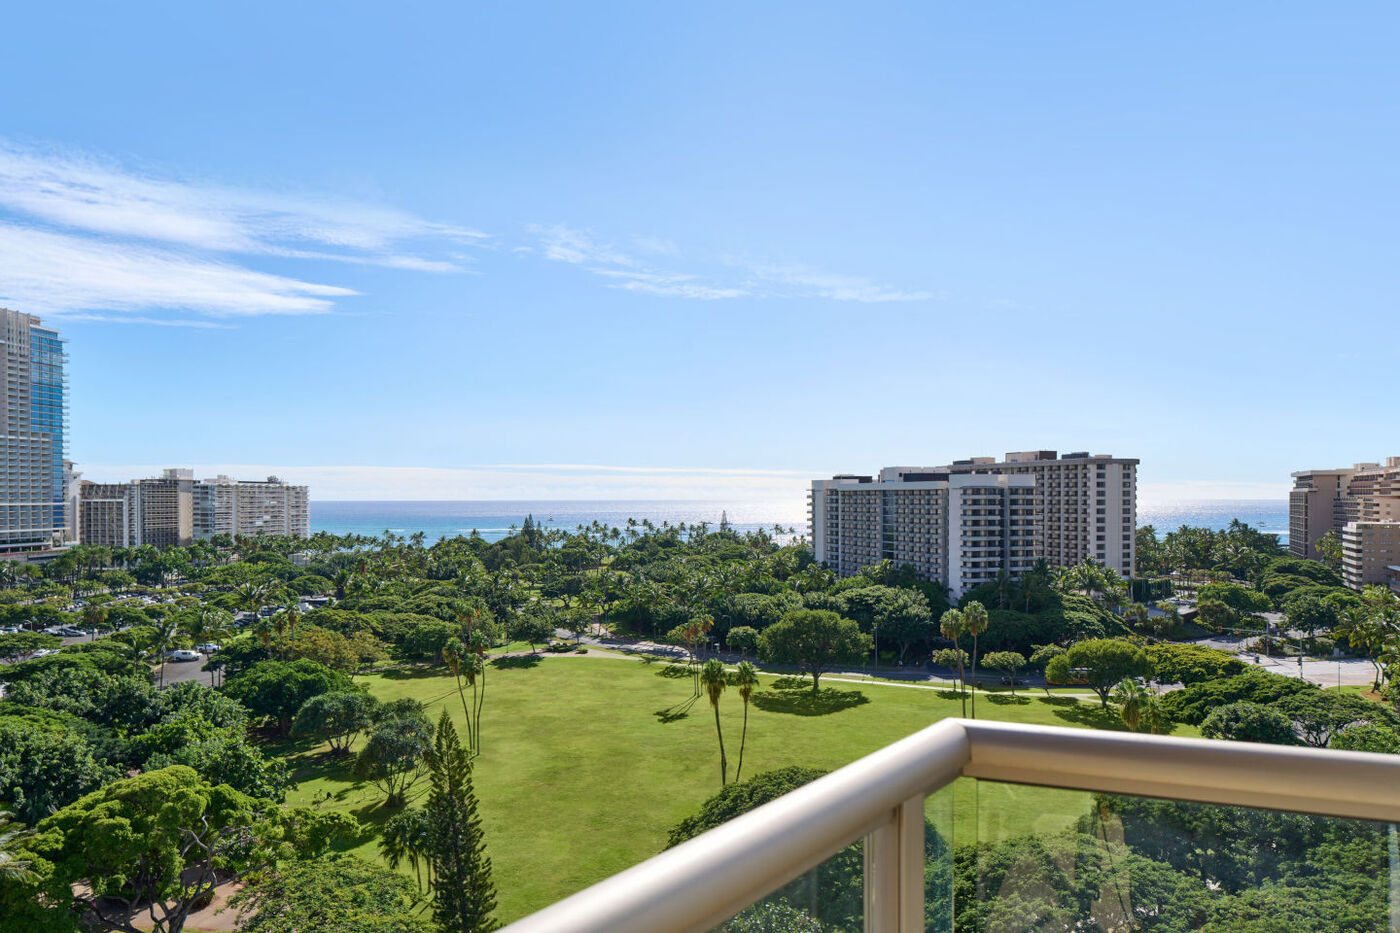 View from private balcony of the one bedroom ocean view suite overlooking the green grass park with trees, pacific ocean in the horizon